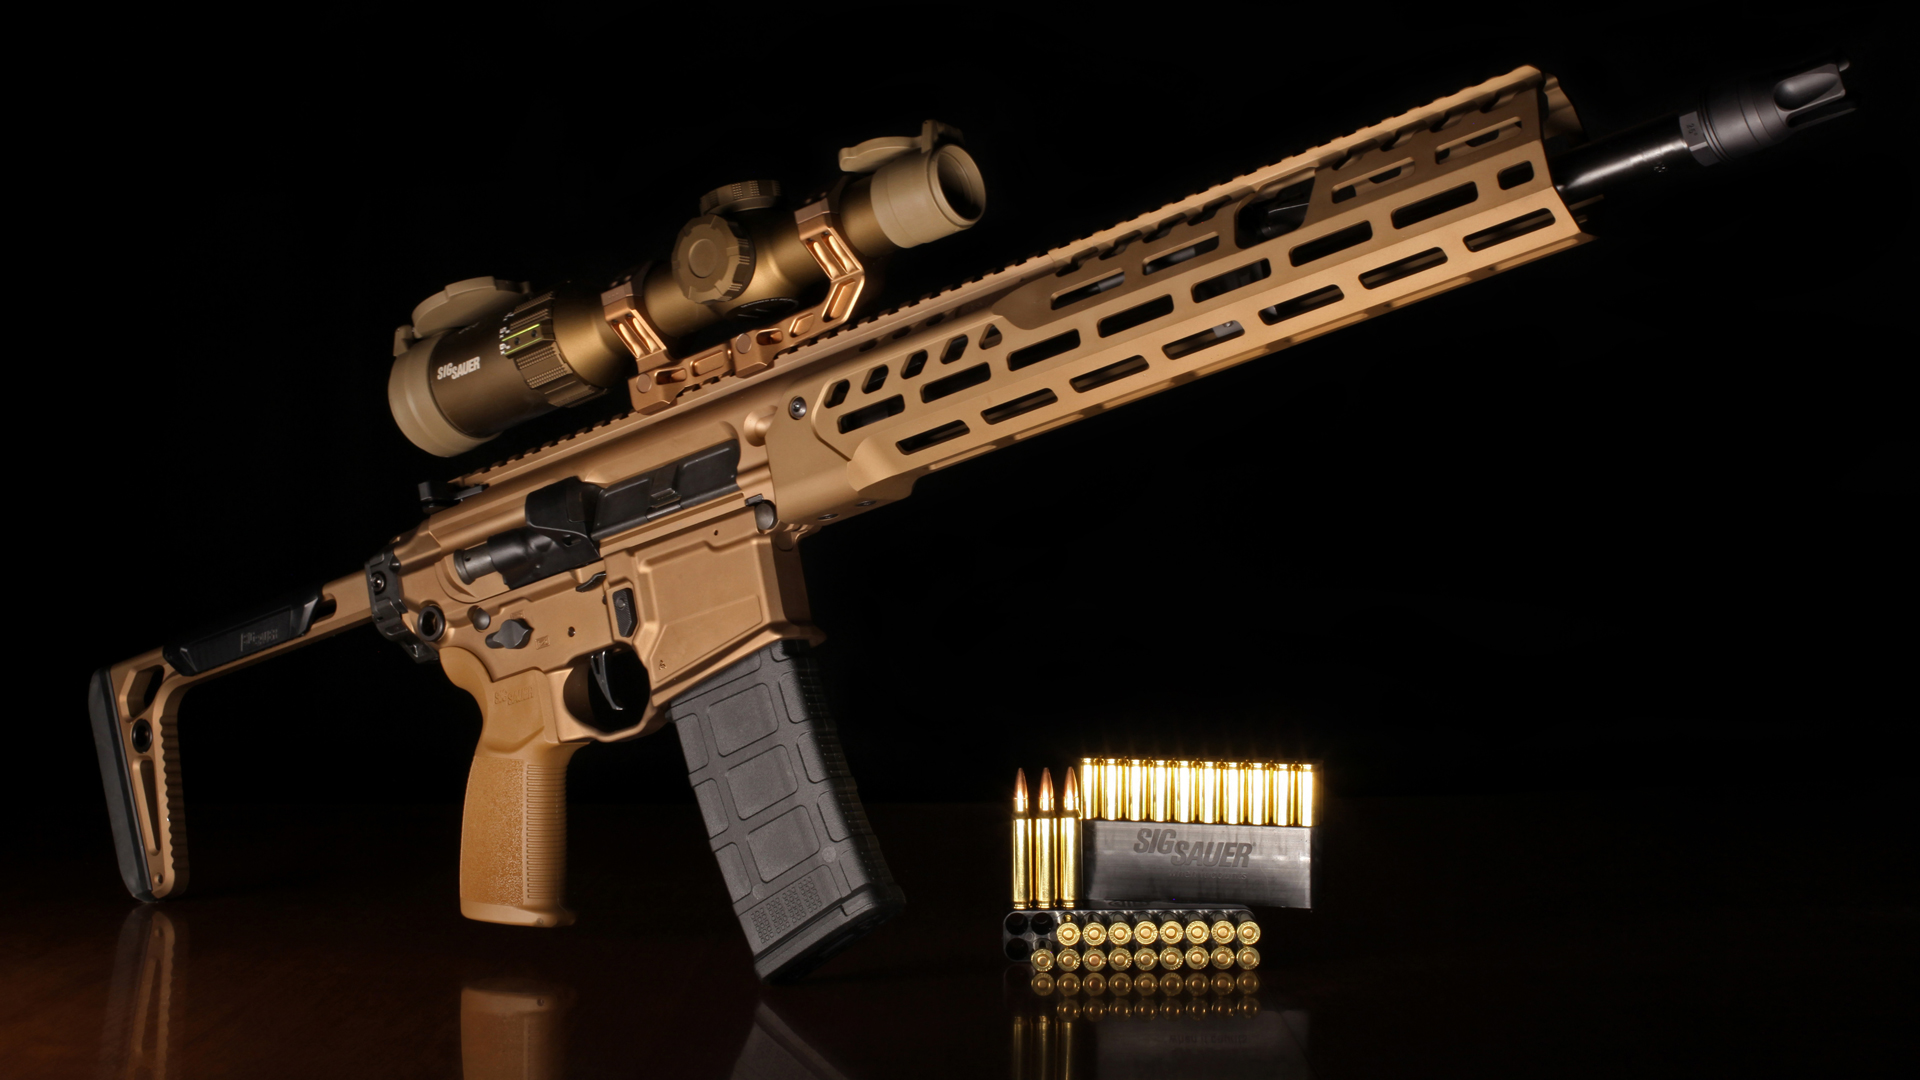 Gunsmith Innovations: Introducing Aftermarket Parts and More to